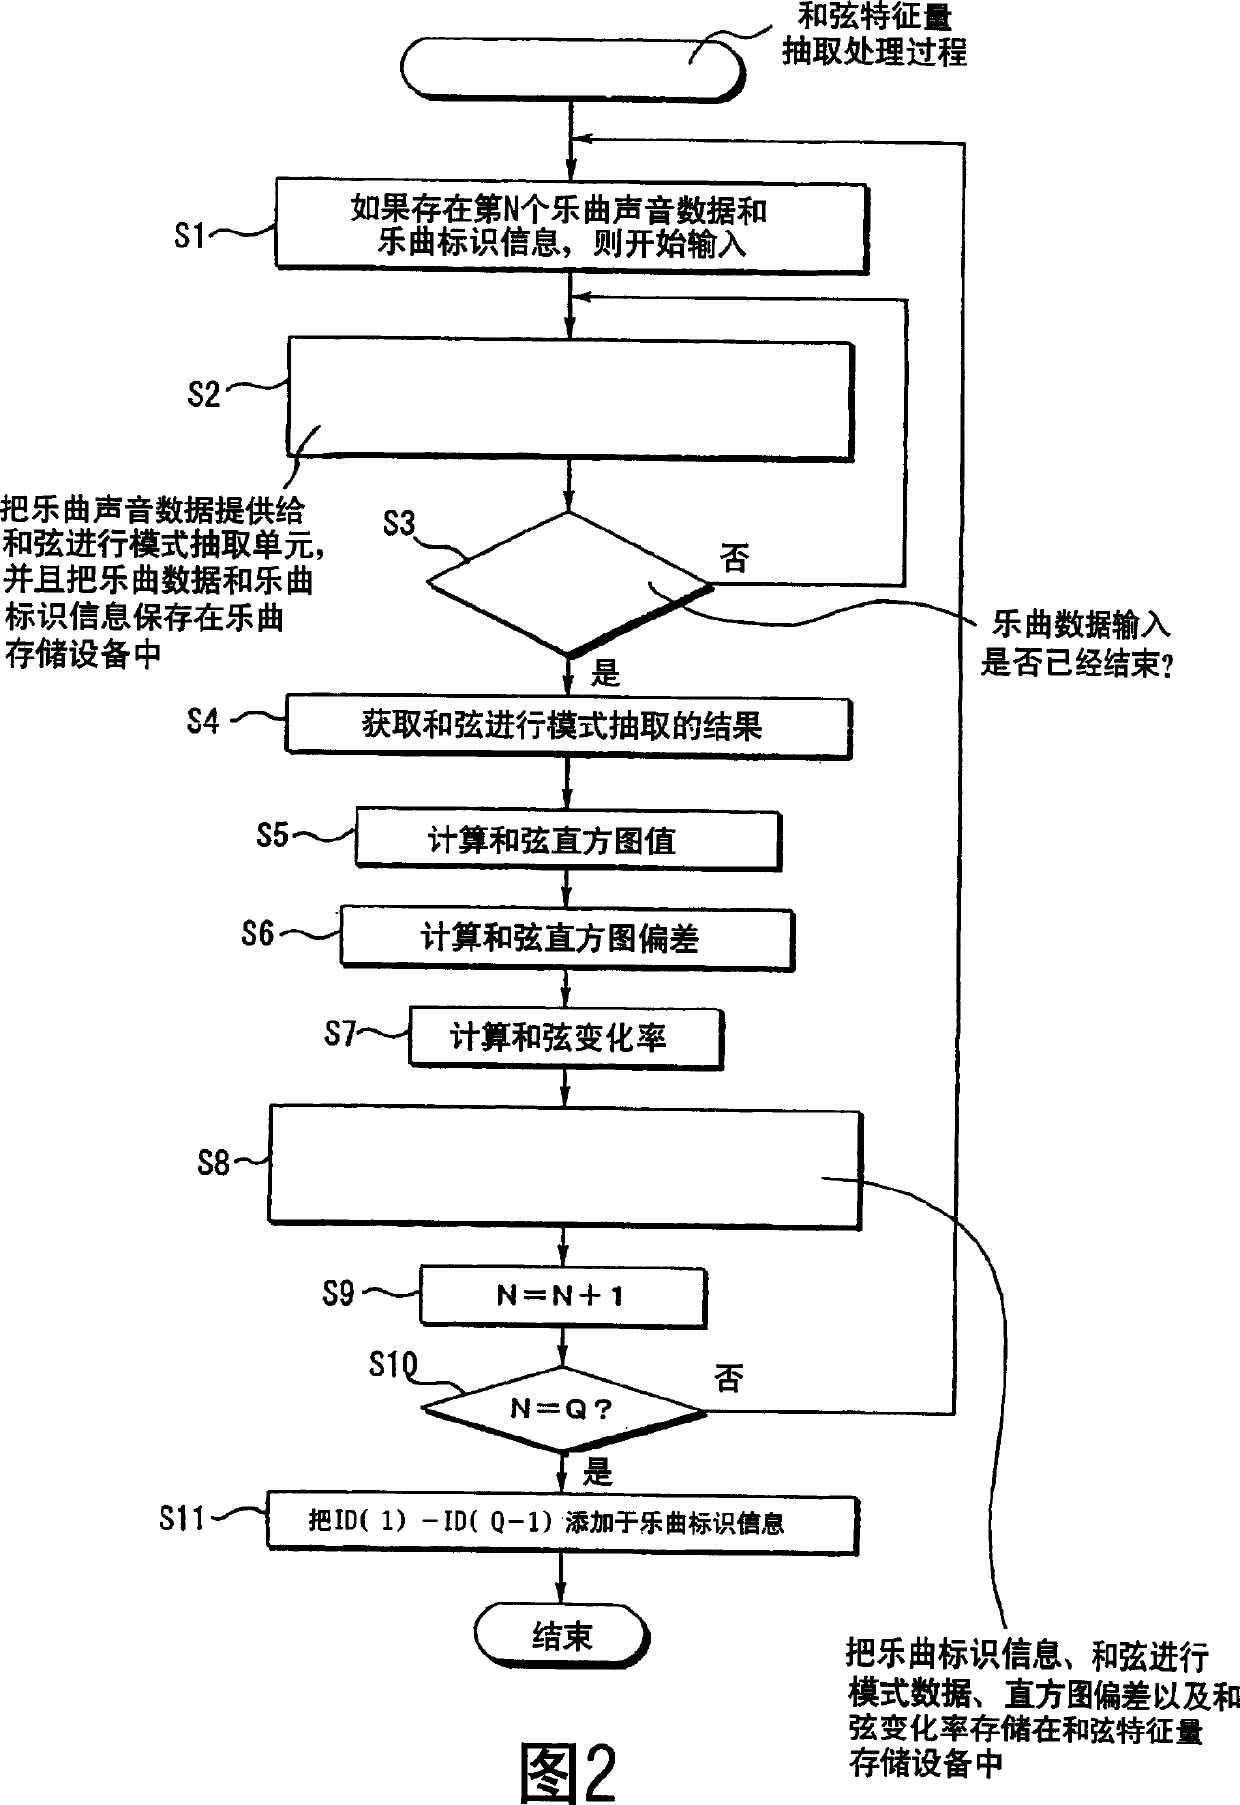 Automatic musical composition classification device and method